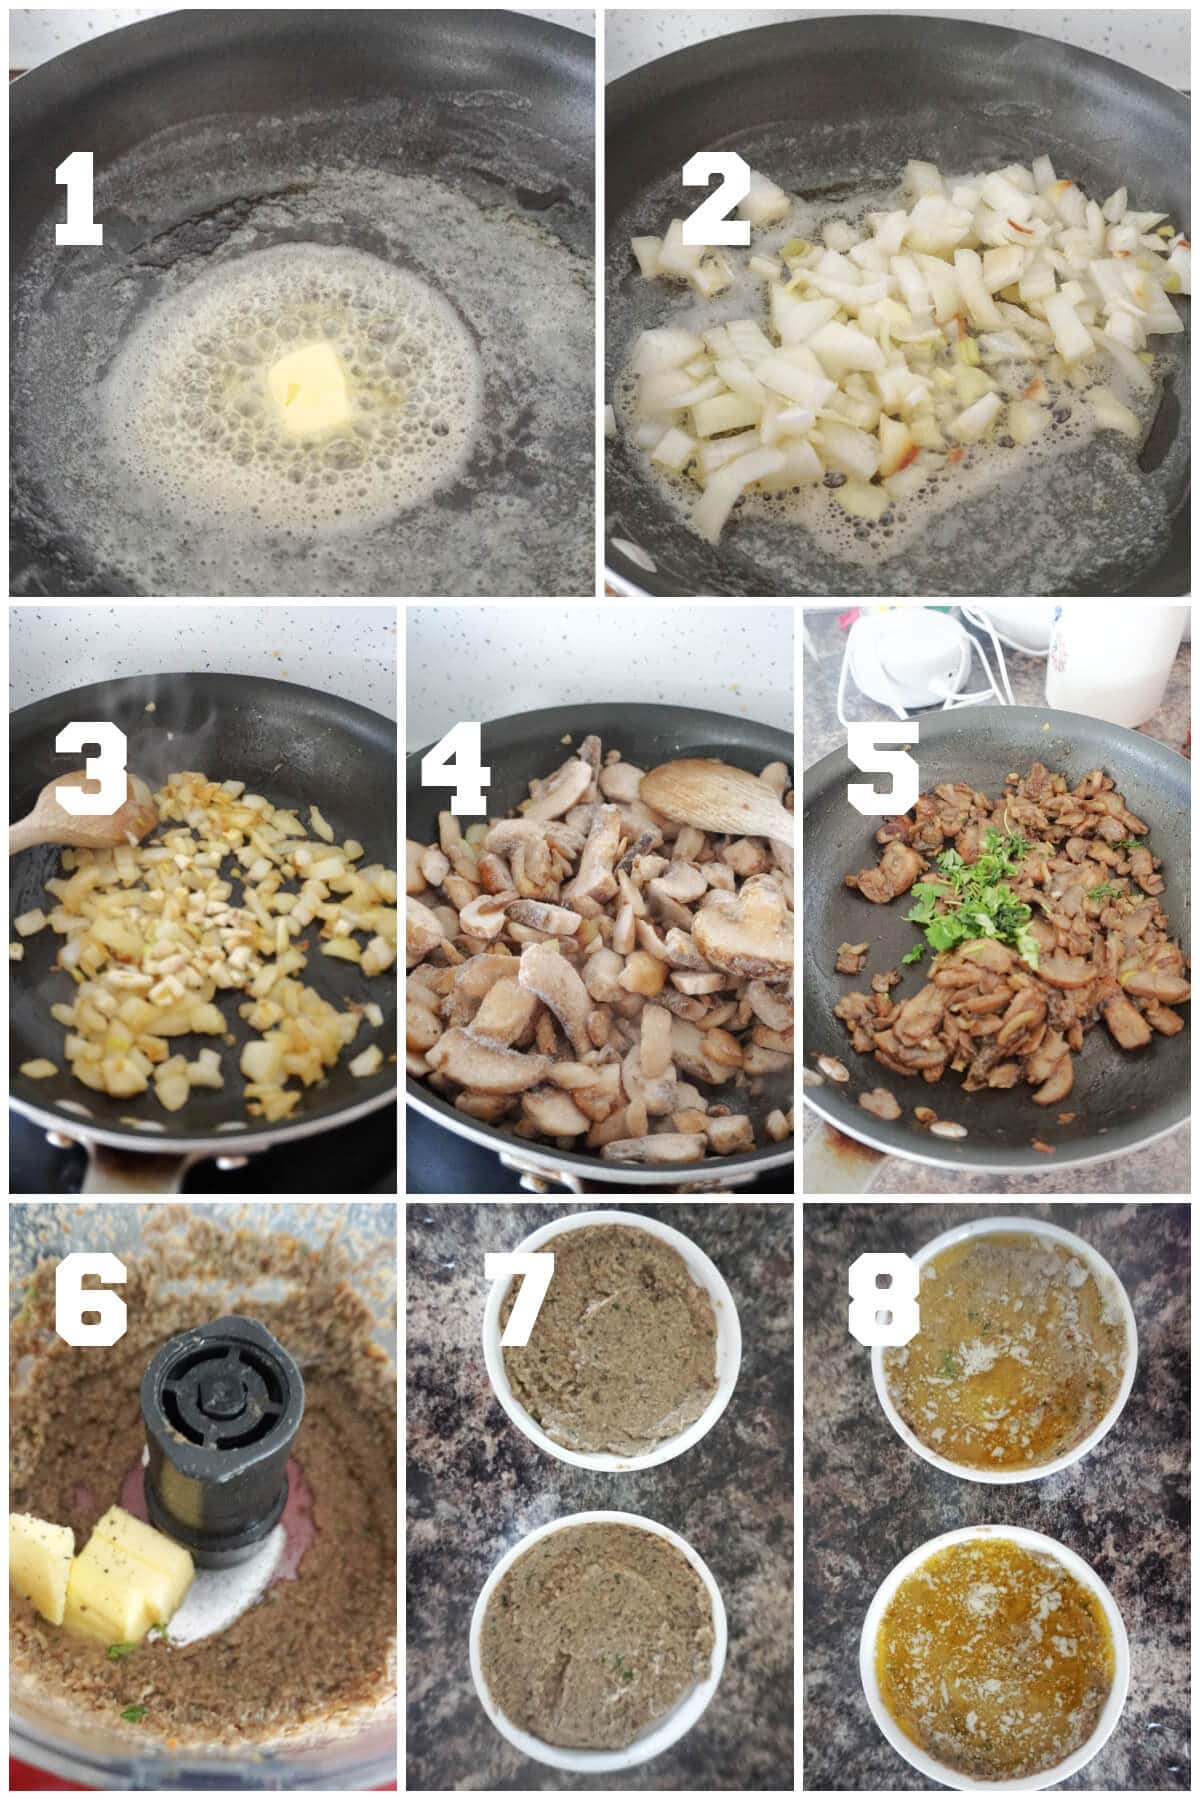 Collage of 8 photos to show how to make mushroom pate